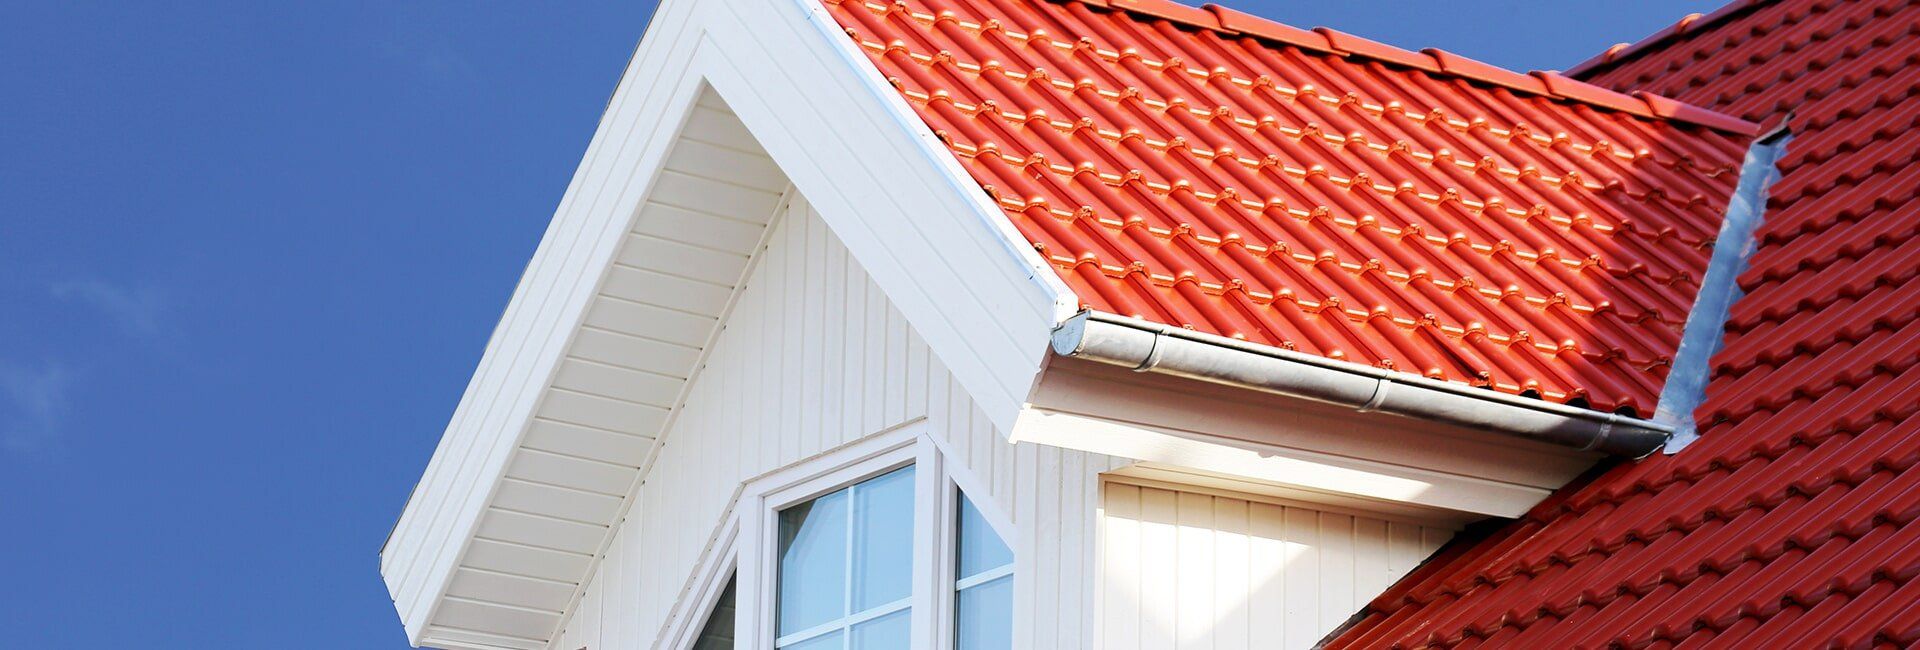 When is it Time to Replace my Roof Tiles?